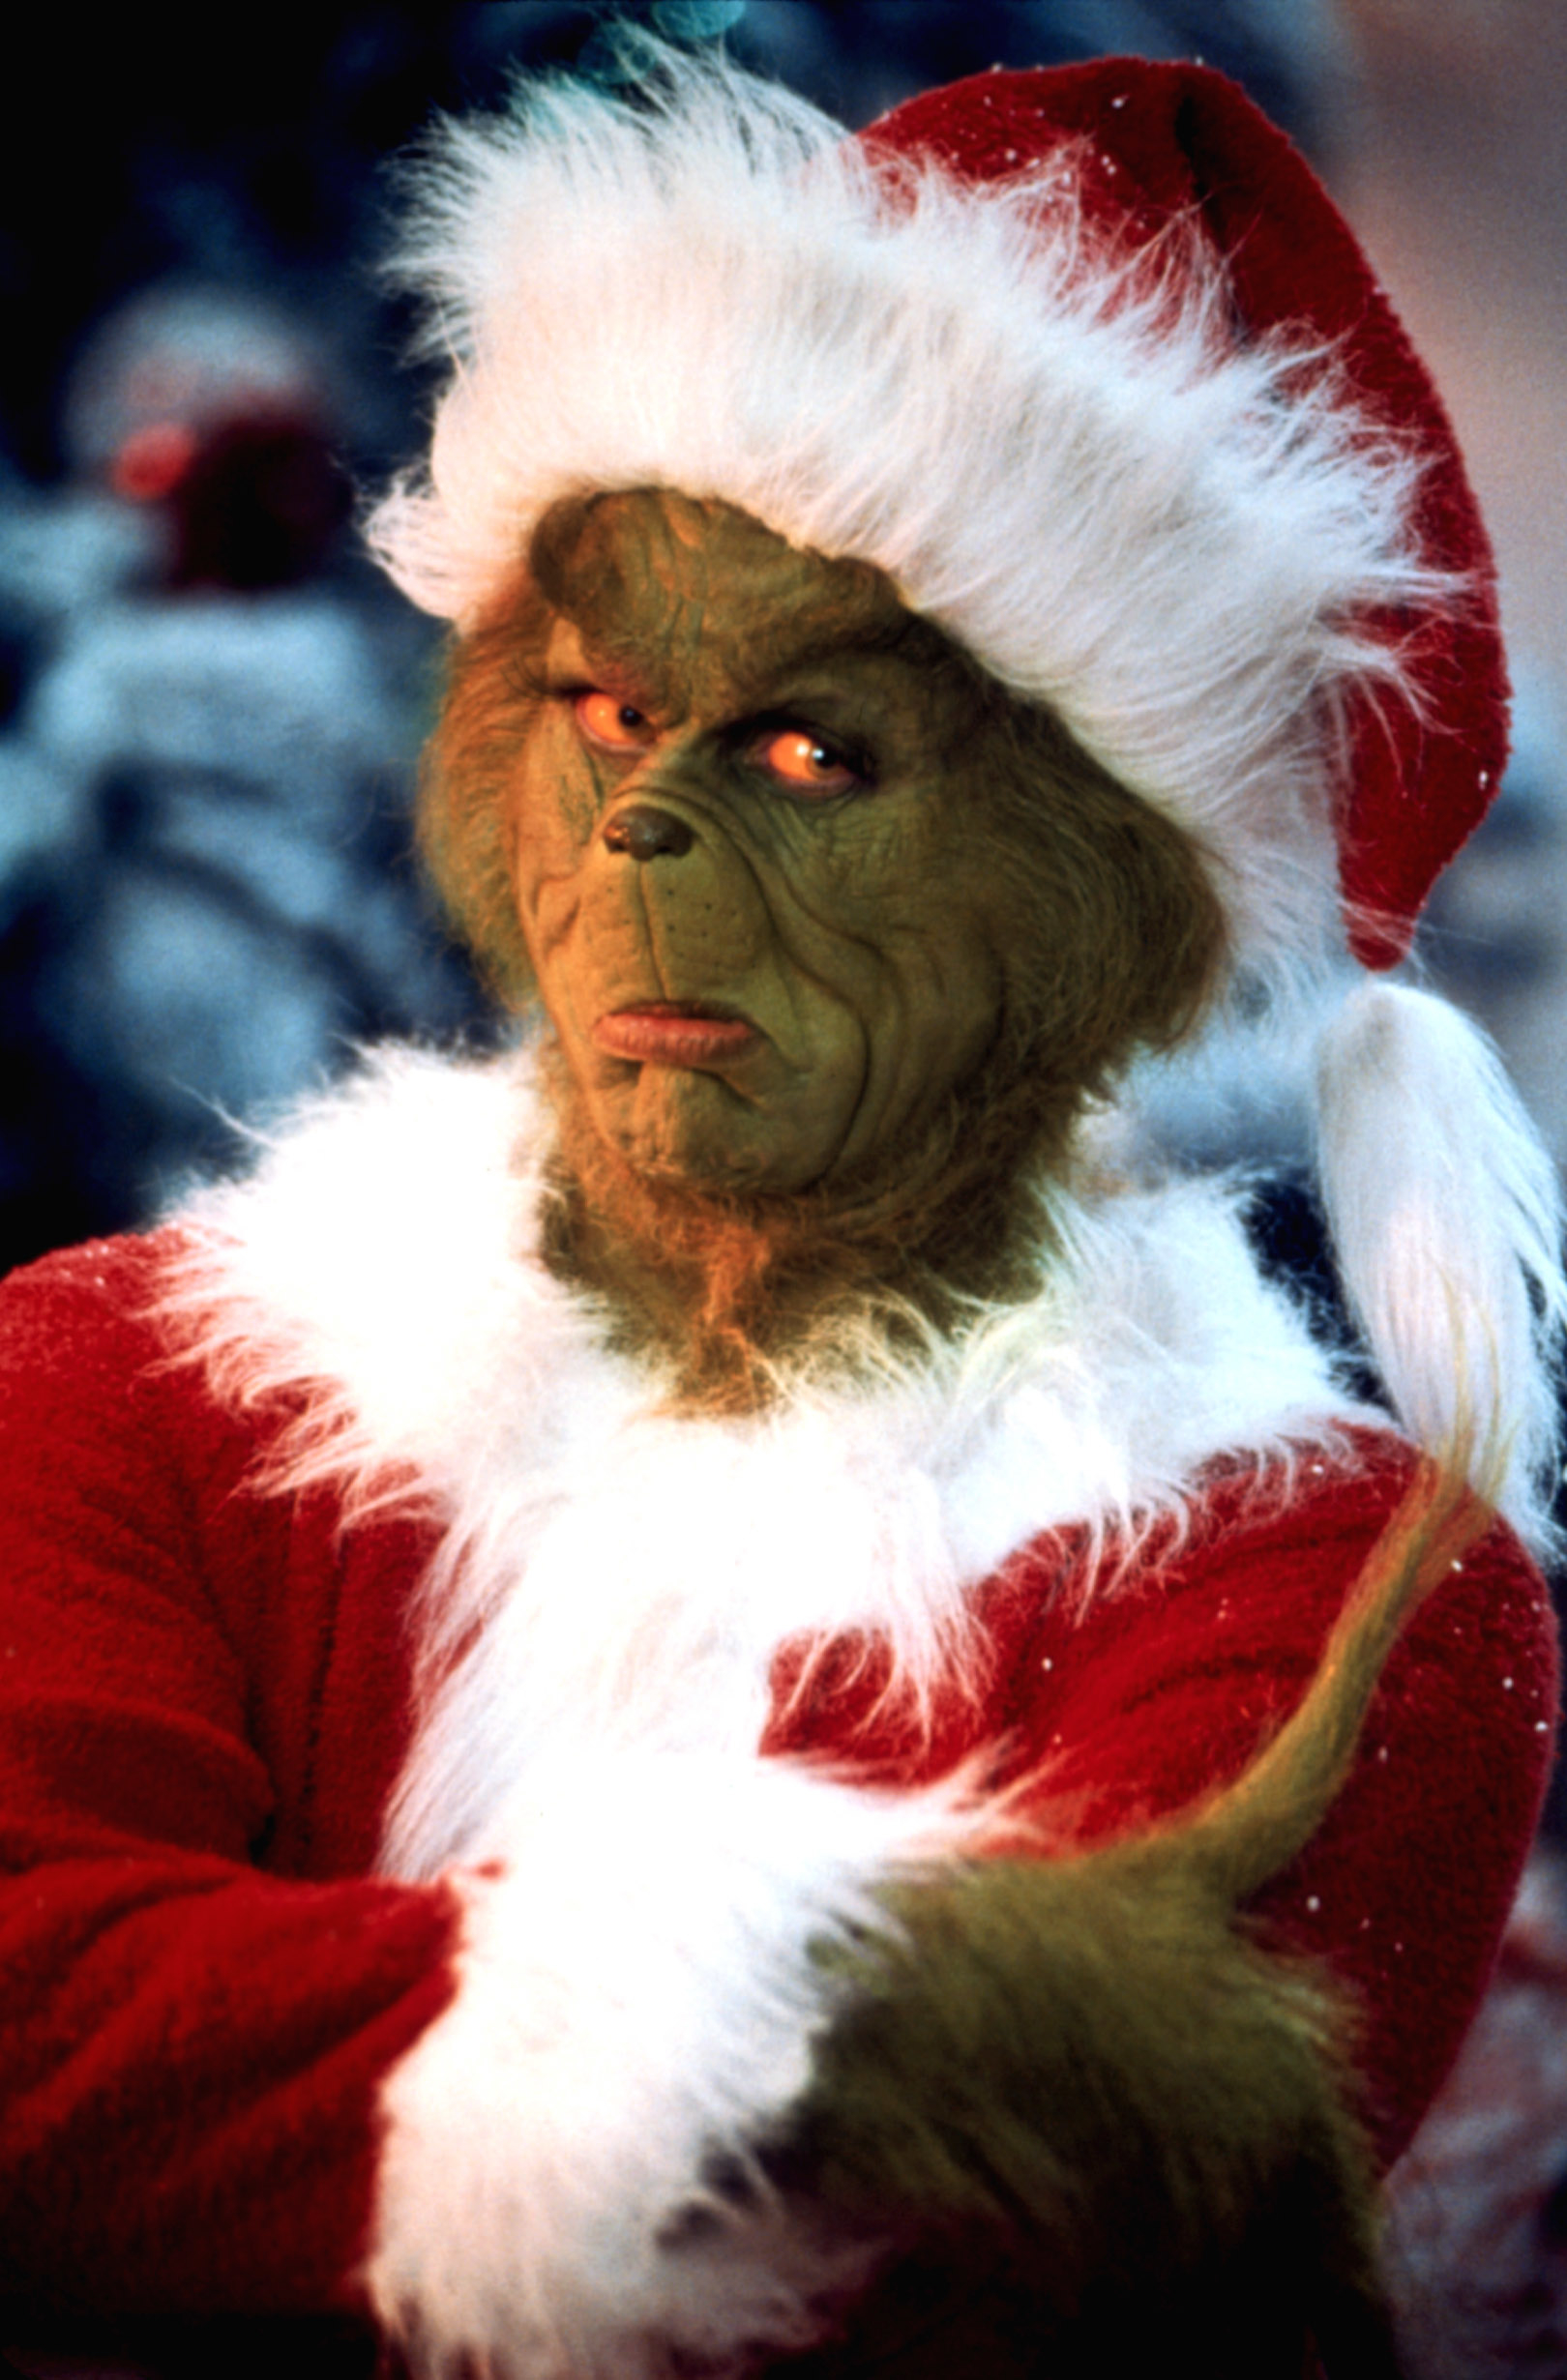 closeup of the grinch in a santa suit